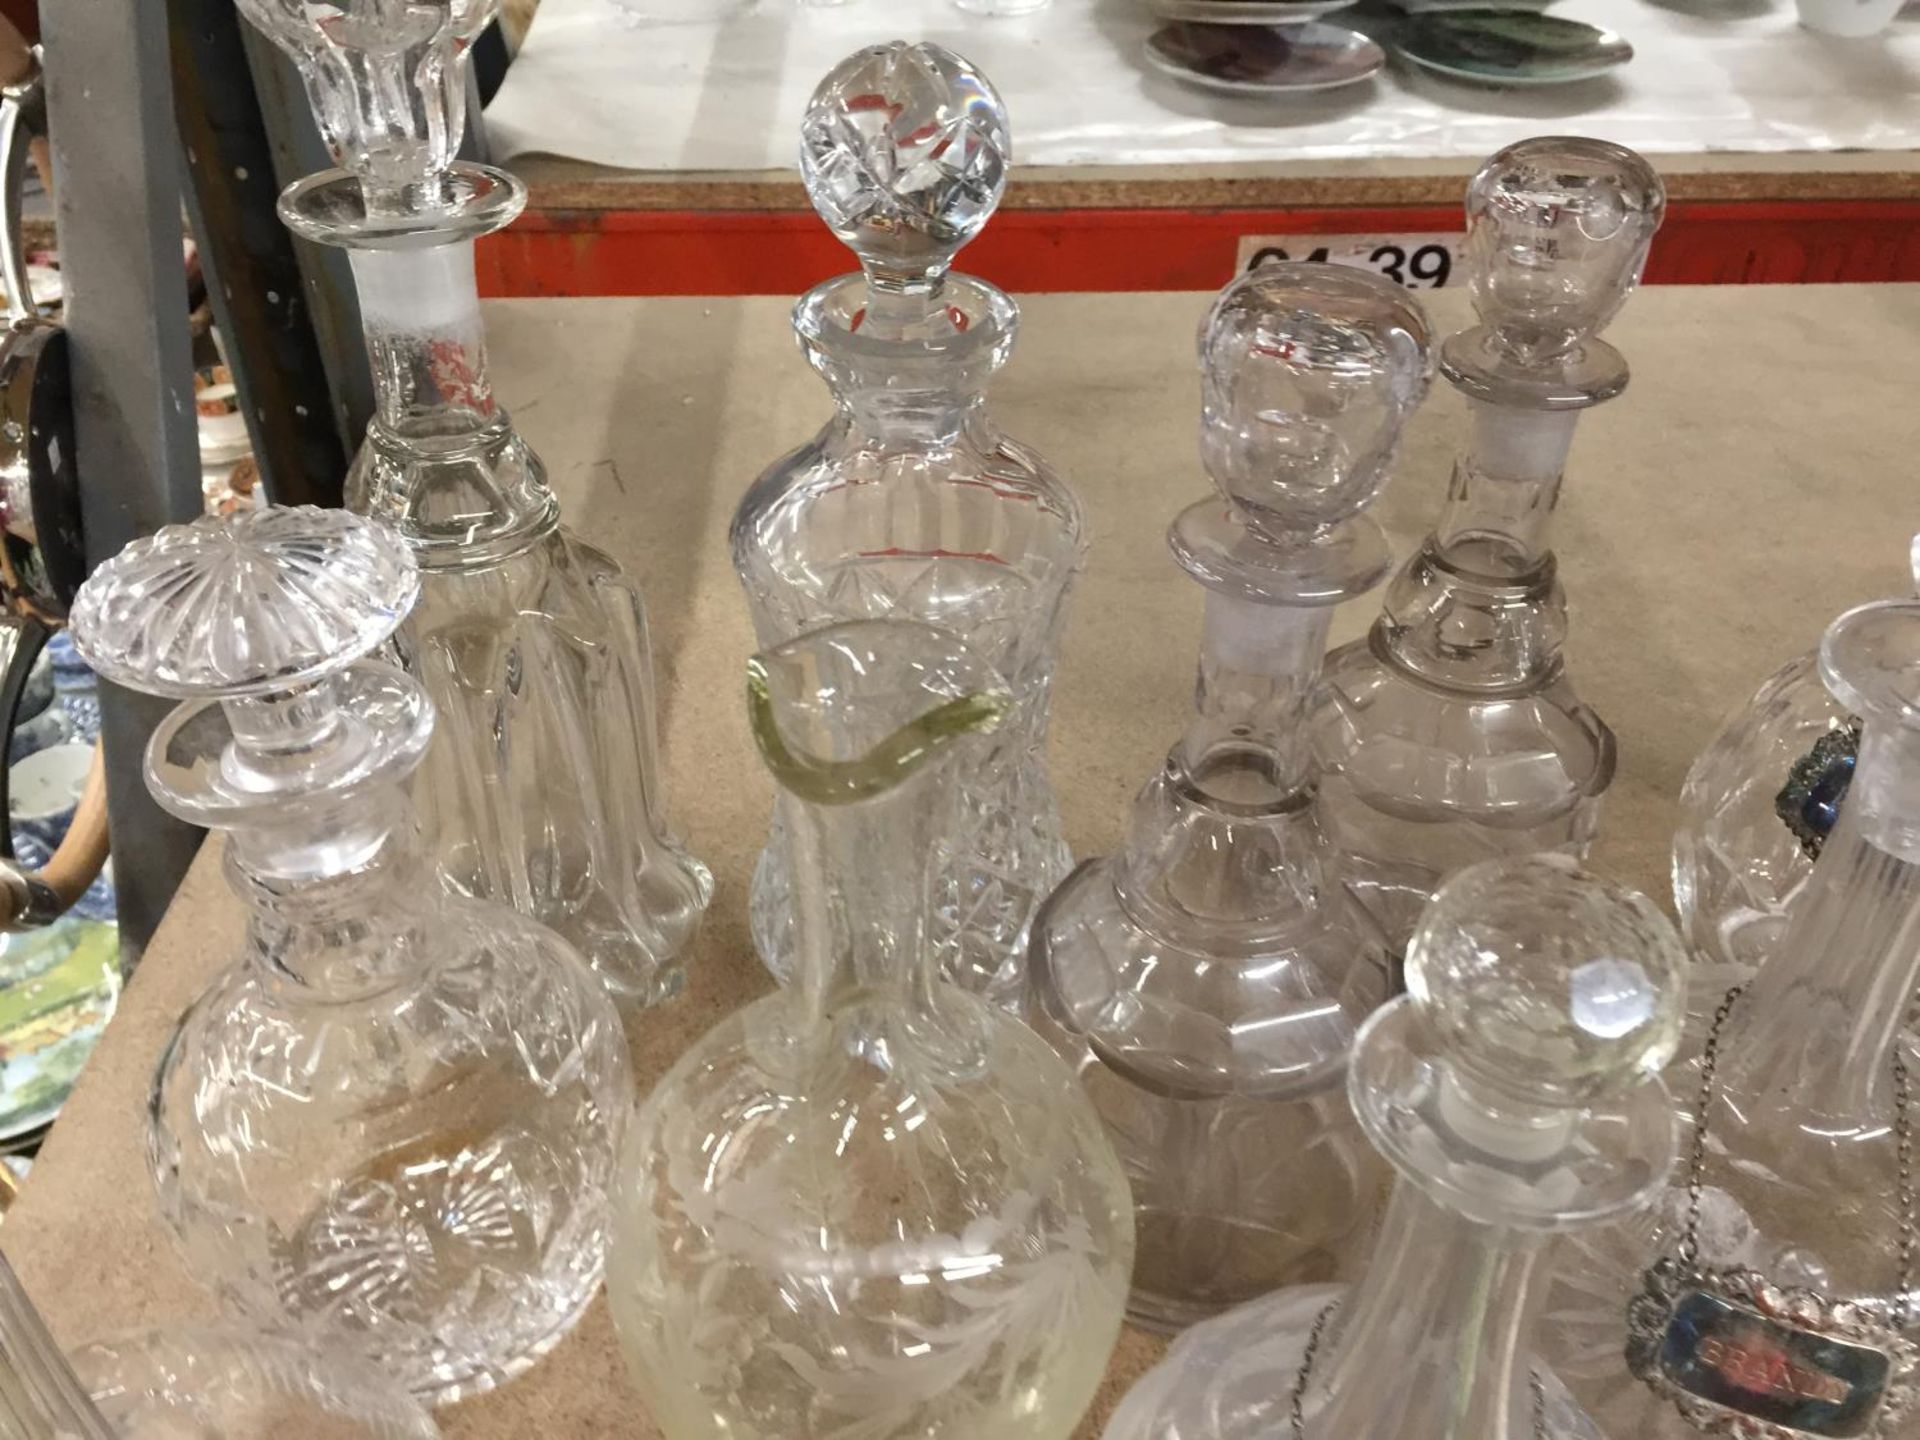 A QUANTITY OF GLASSWARE INCLUDING MAINLY DECANTERS, SOME WITH NAME TAGS PLUS A SCENT BOTTLE, BISCUIT - Image 5 of 6